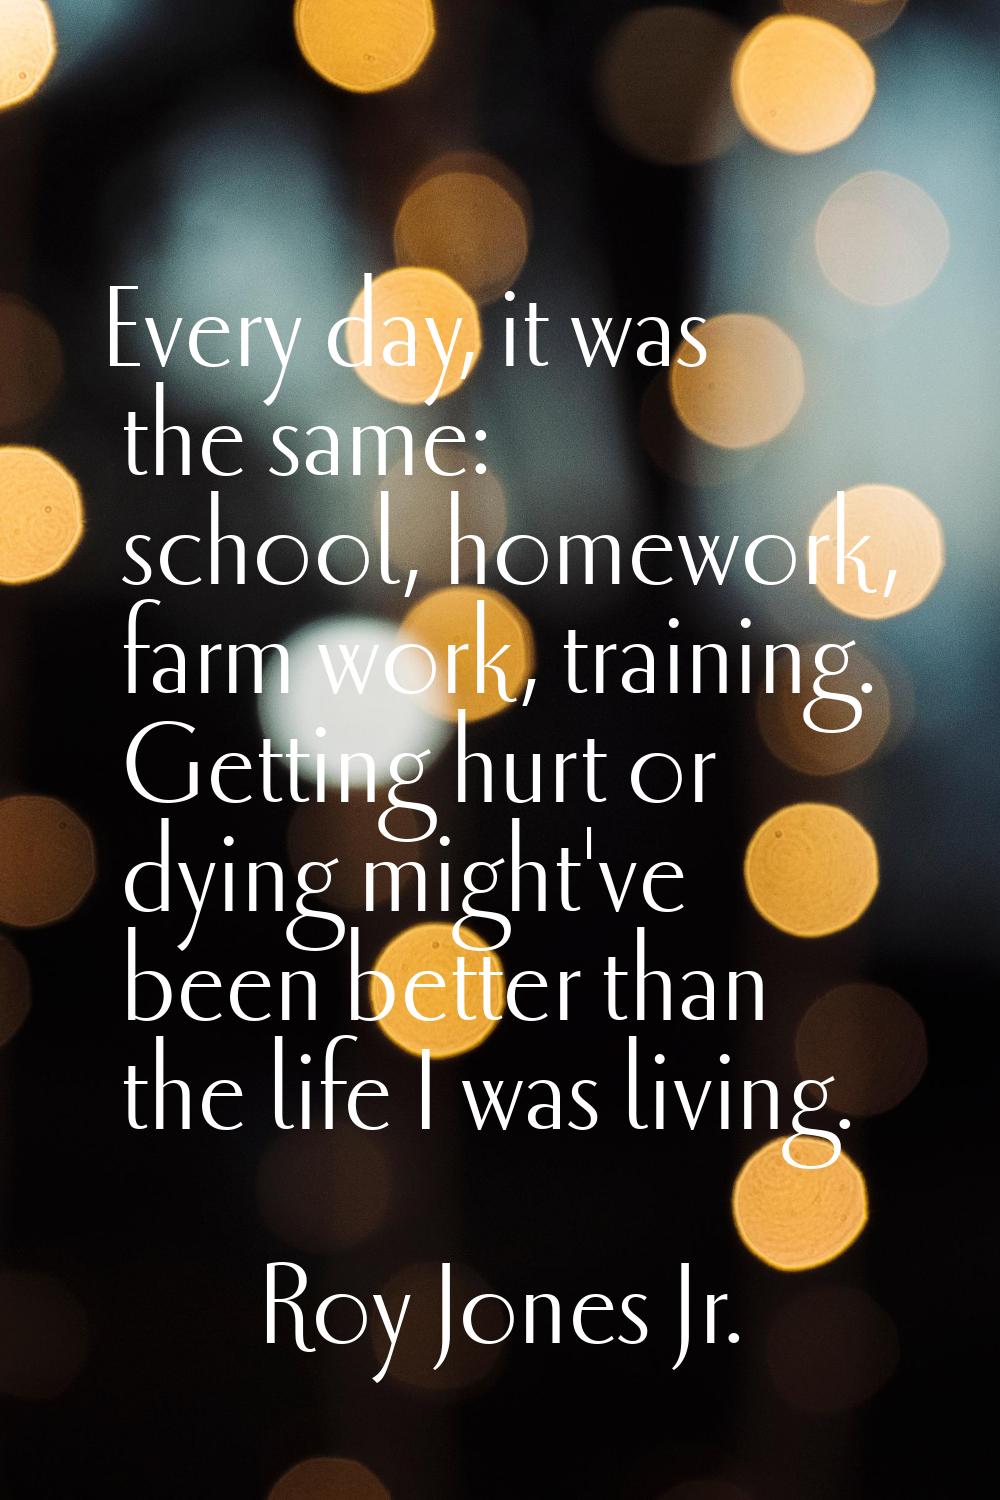 Every day, it was the same: school, homework, farm work, training. Getting hurt or dying might've b